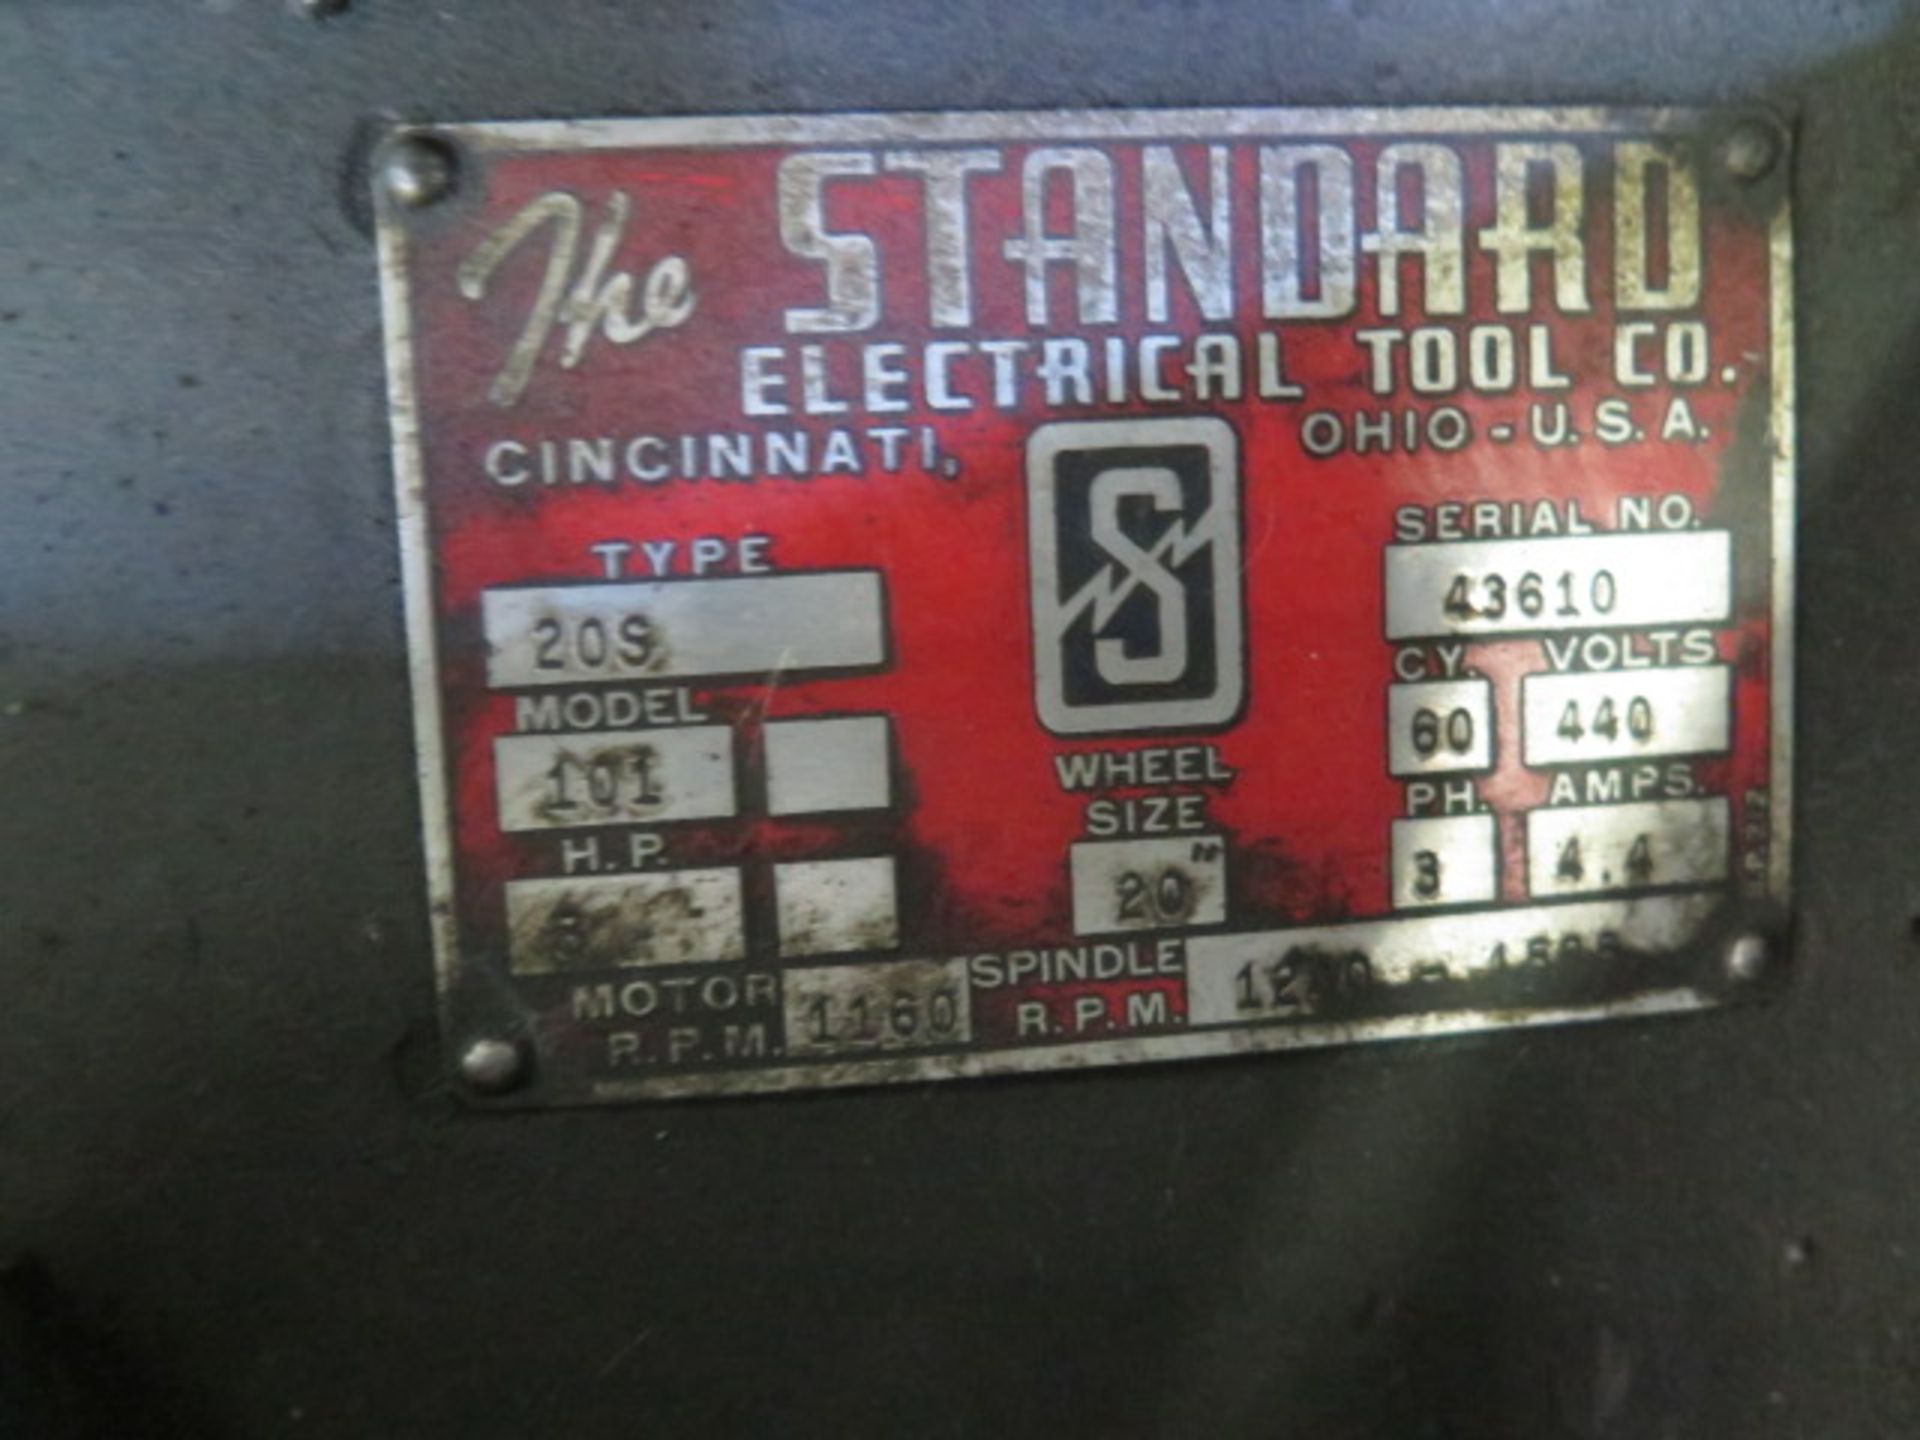 Standard Type 20S 20” Grinder s/n 43610 w/ Coolant (SOLD AS-IS - NO WARRANTY) - Image 8 of 8